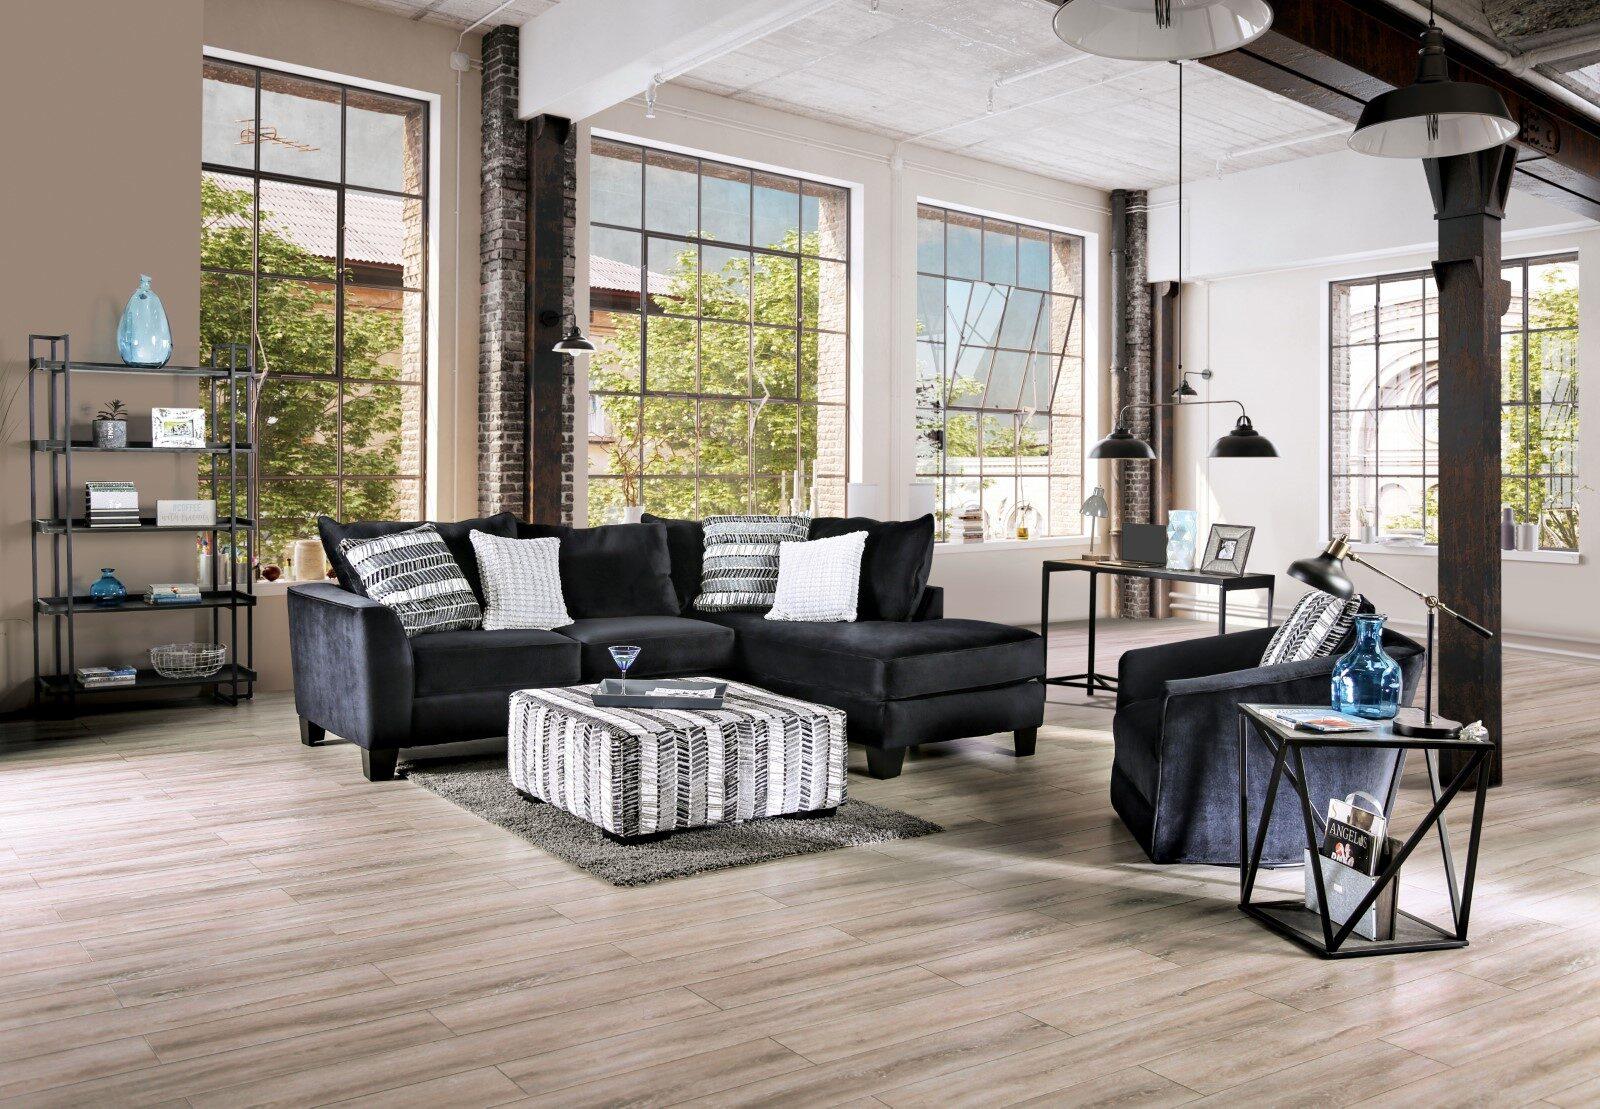 Transitional Sectional Sofa and Chair SM5160-2PC Modbury SM5160-2PC in Black Microfiber